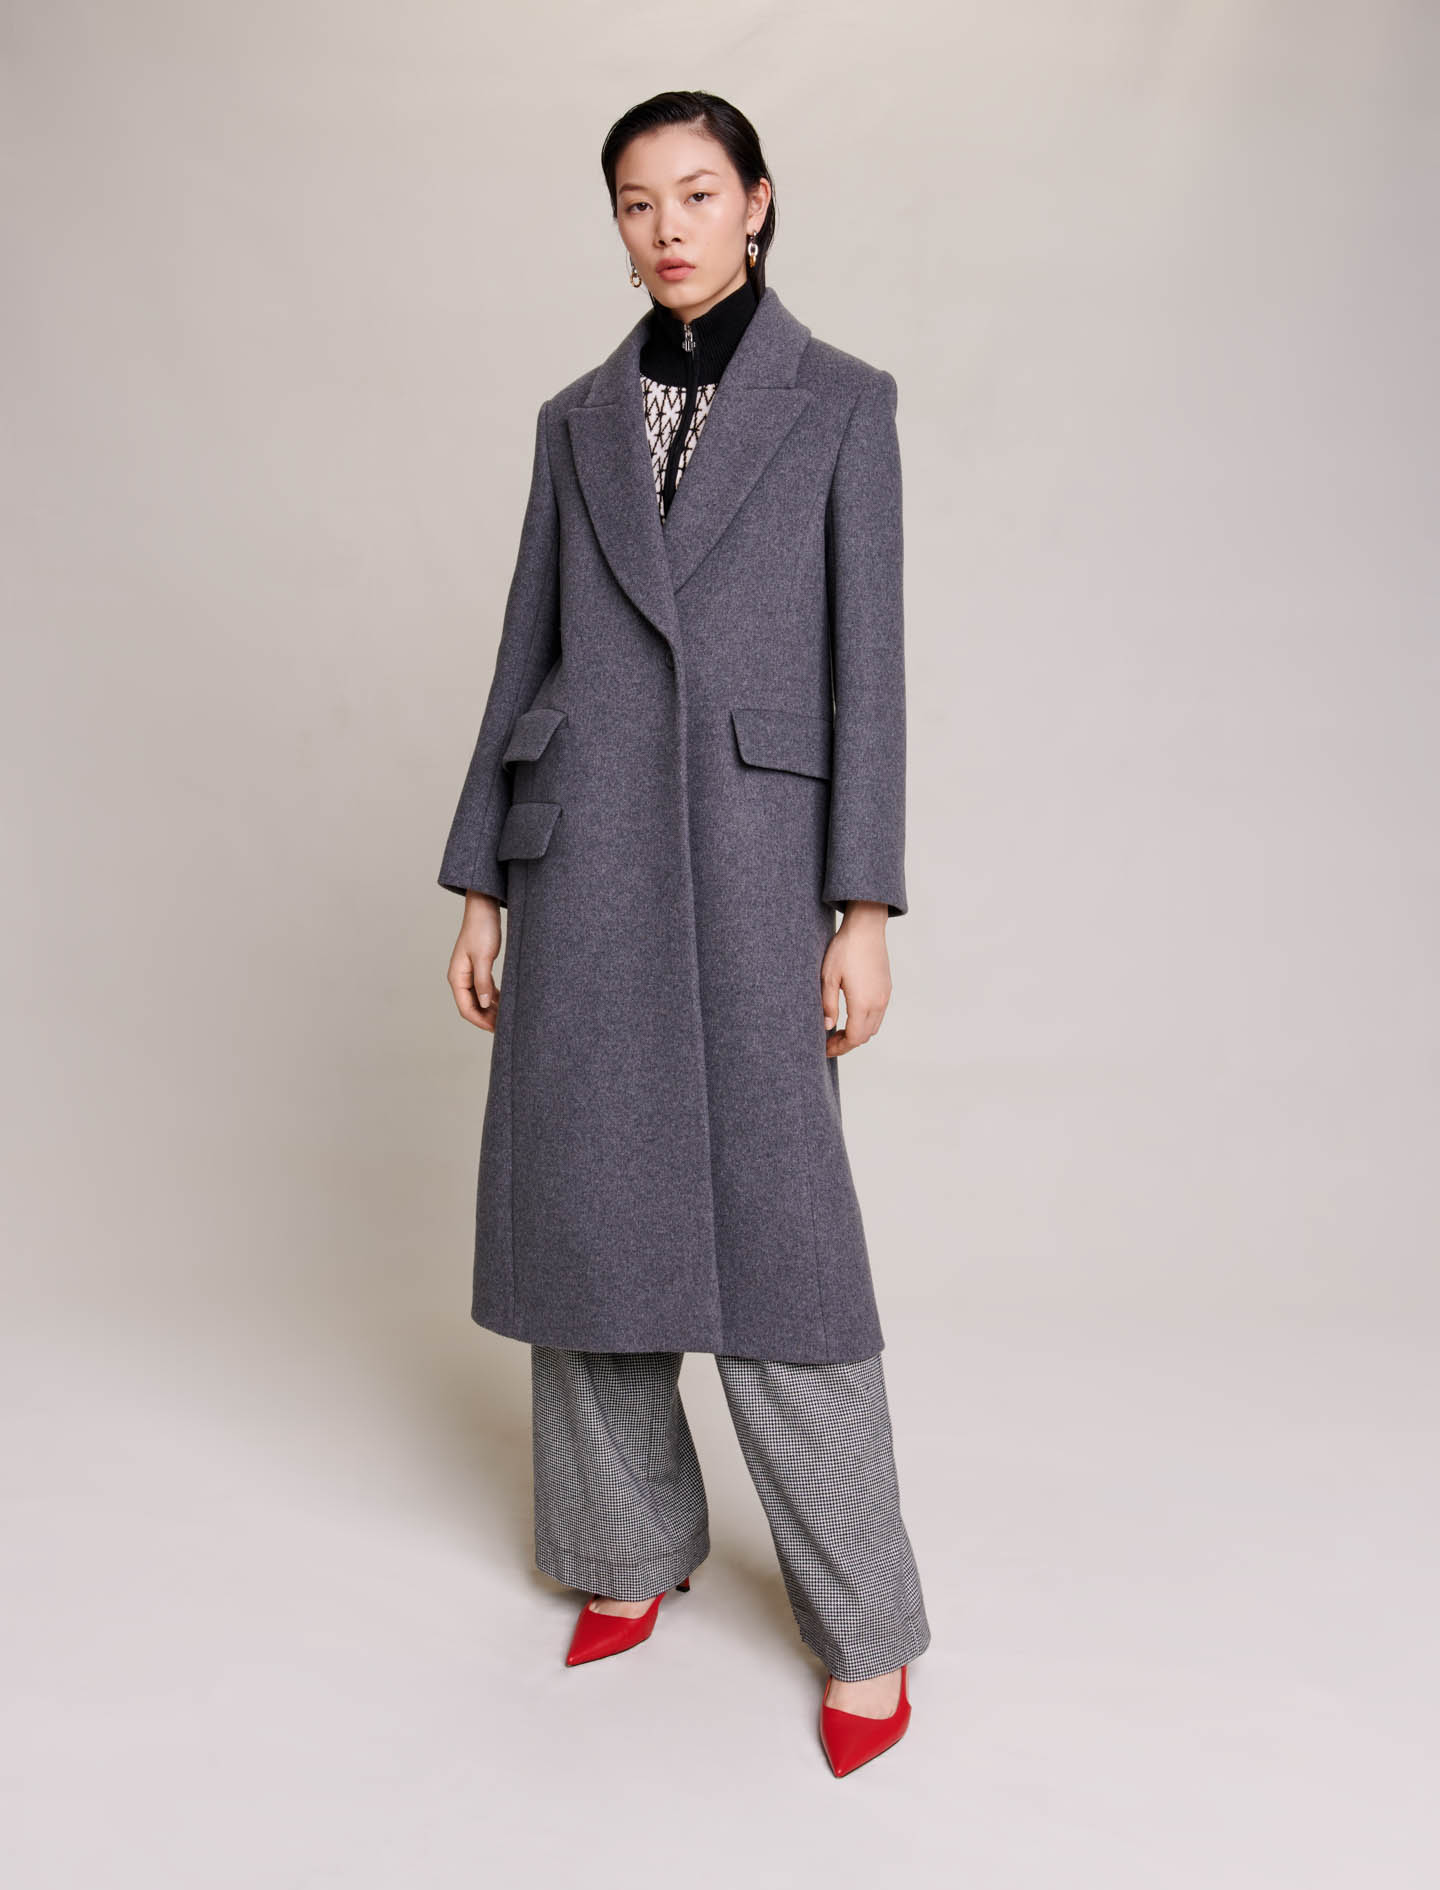 Maje Woman's wool, Long coat for Fall/Winter, in color Grey / Grey